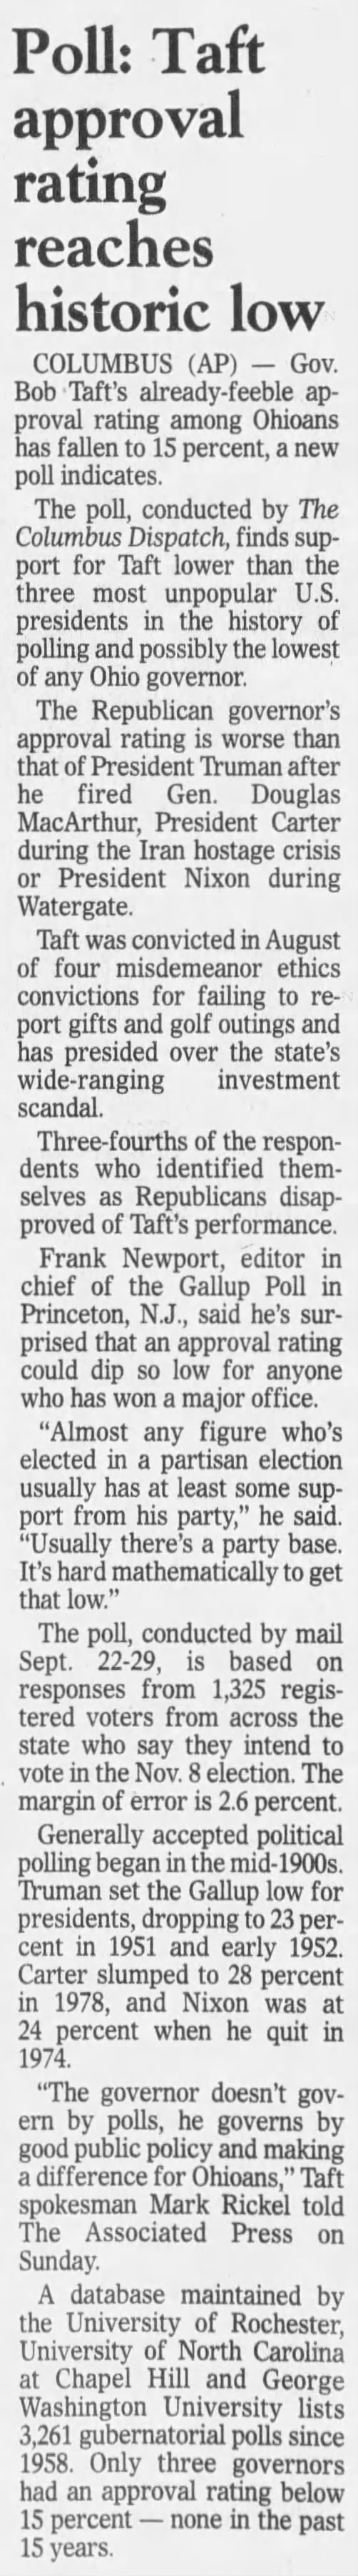 Poll: Taft approval rating reaches historic low